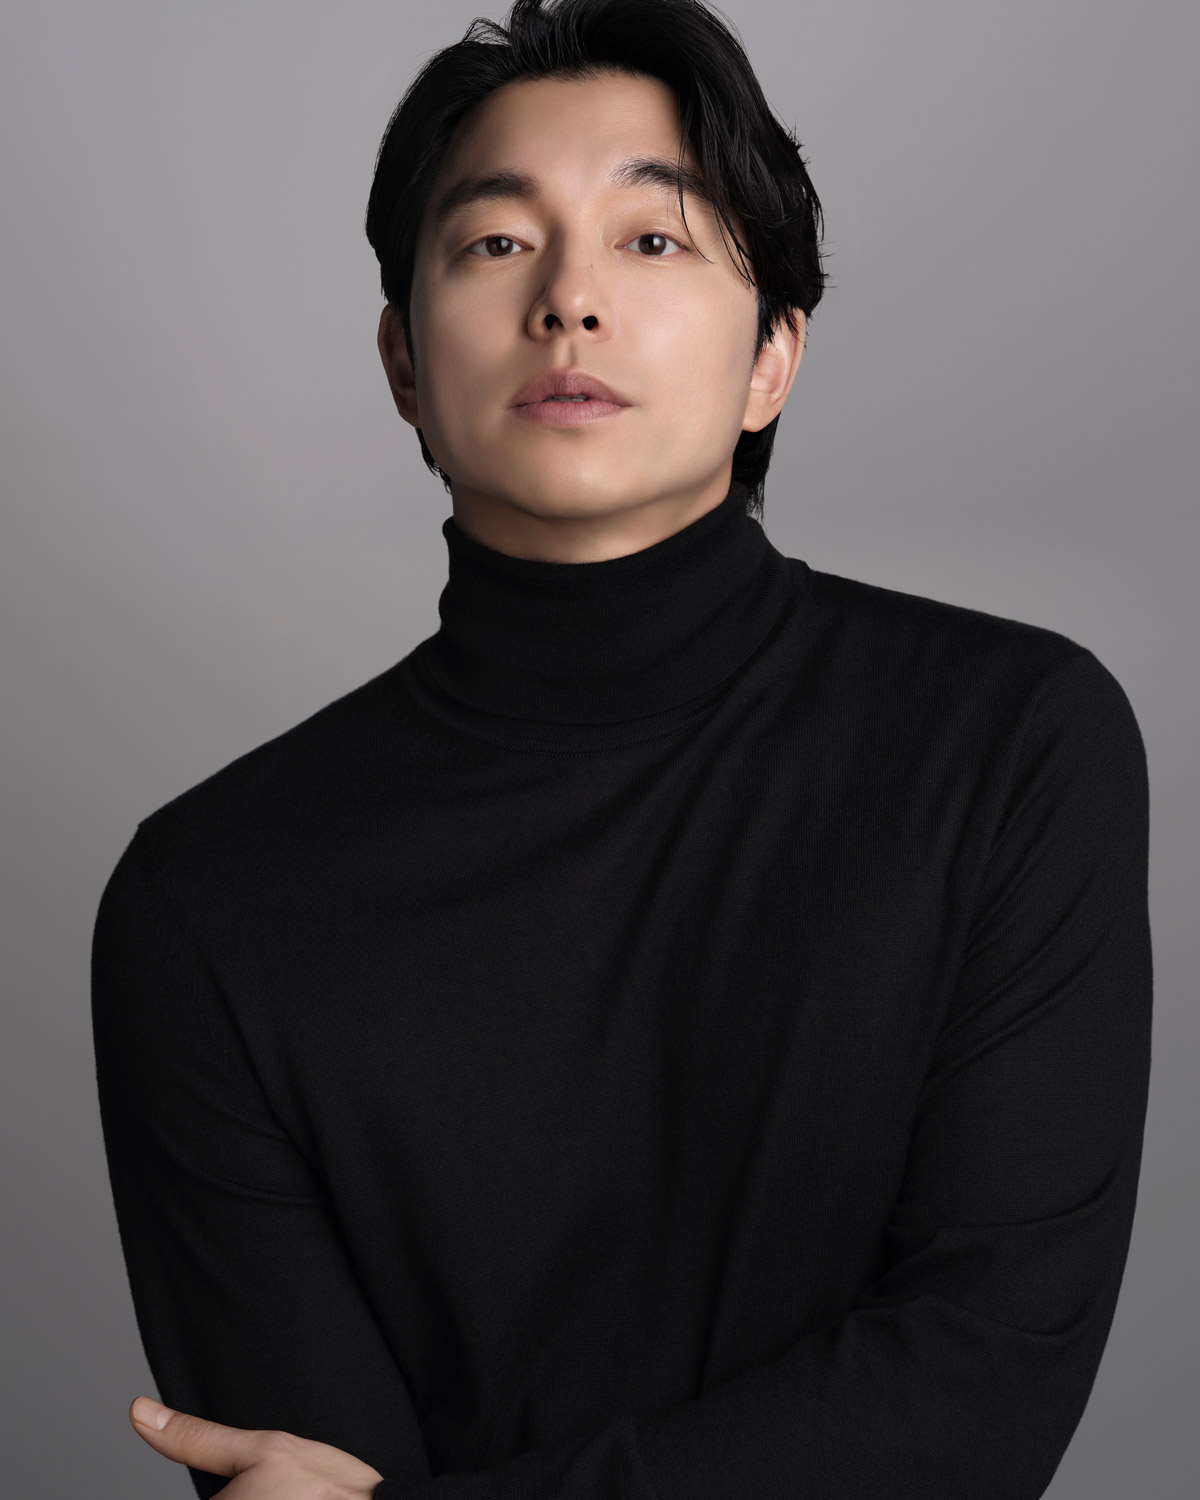 gong yoo tom ford beauty